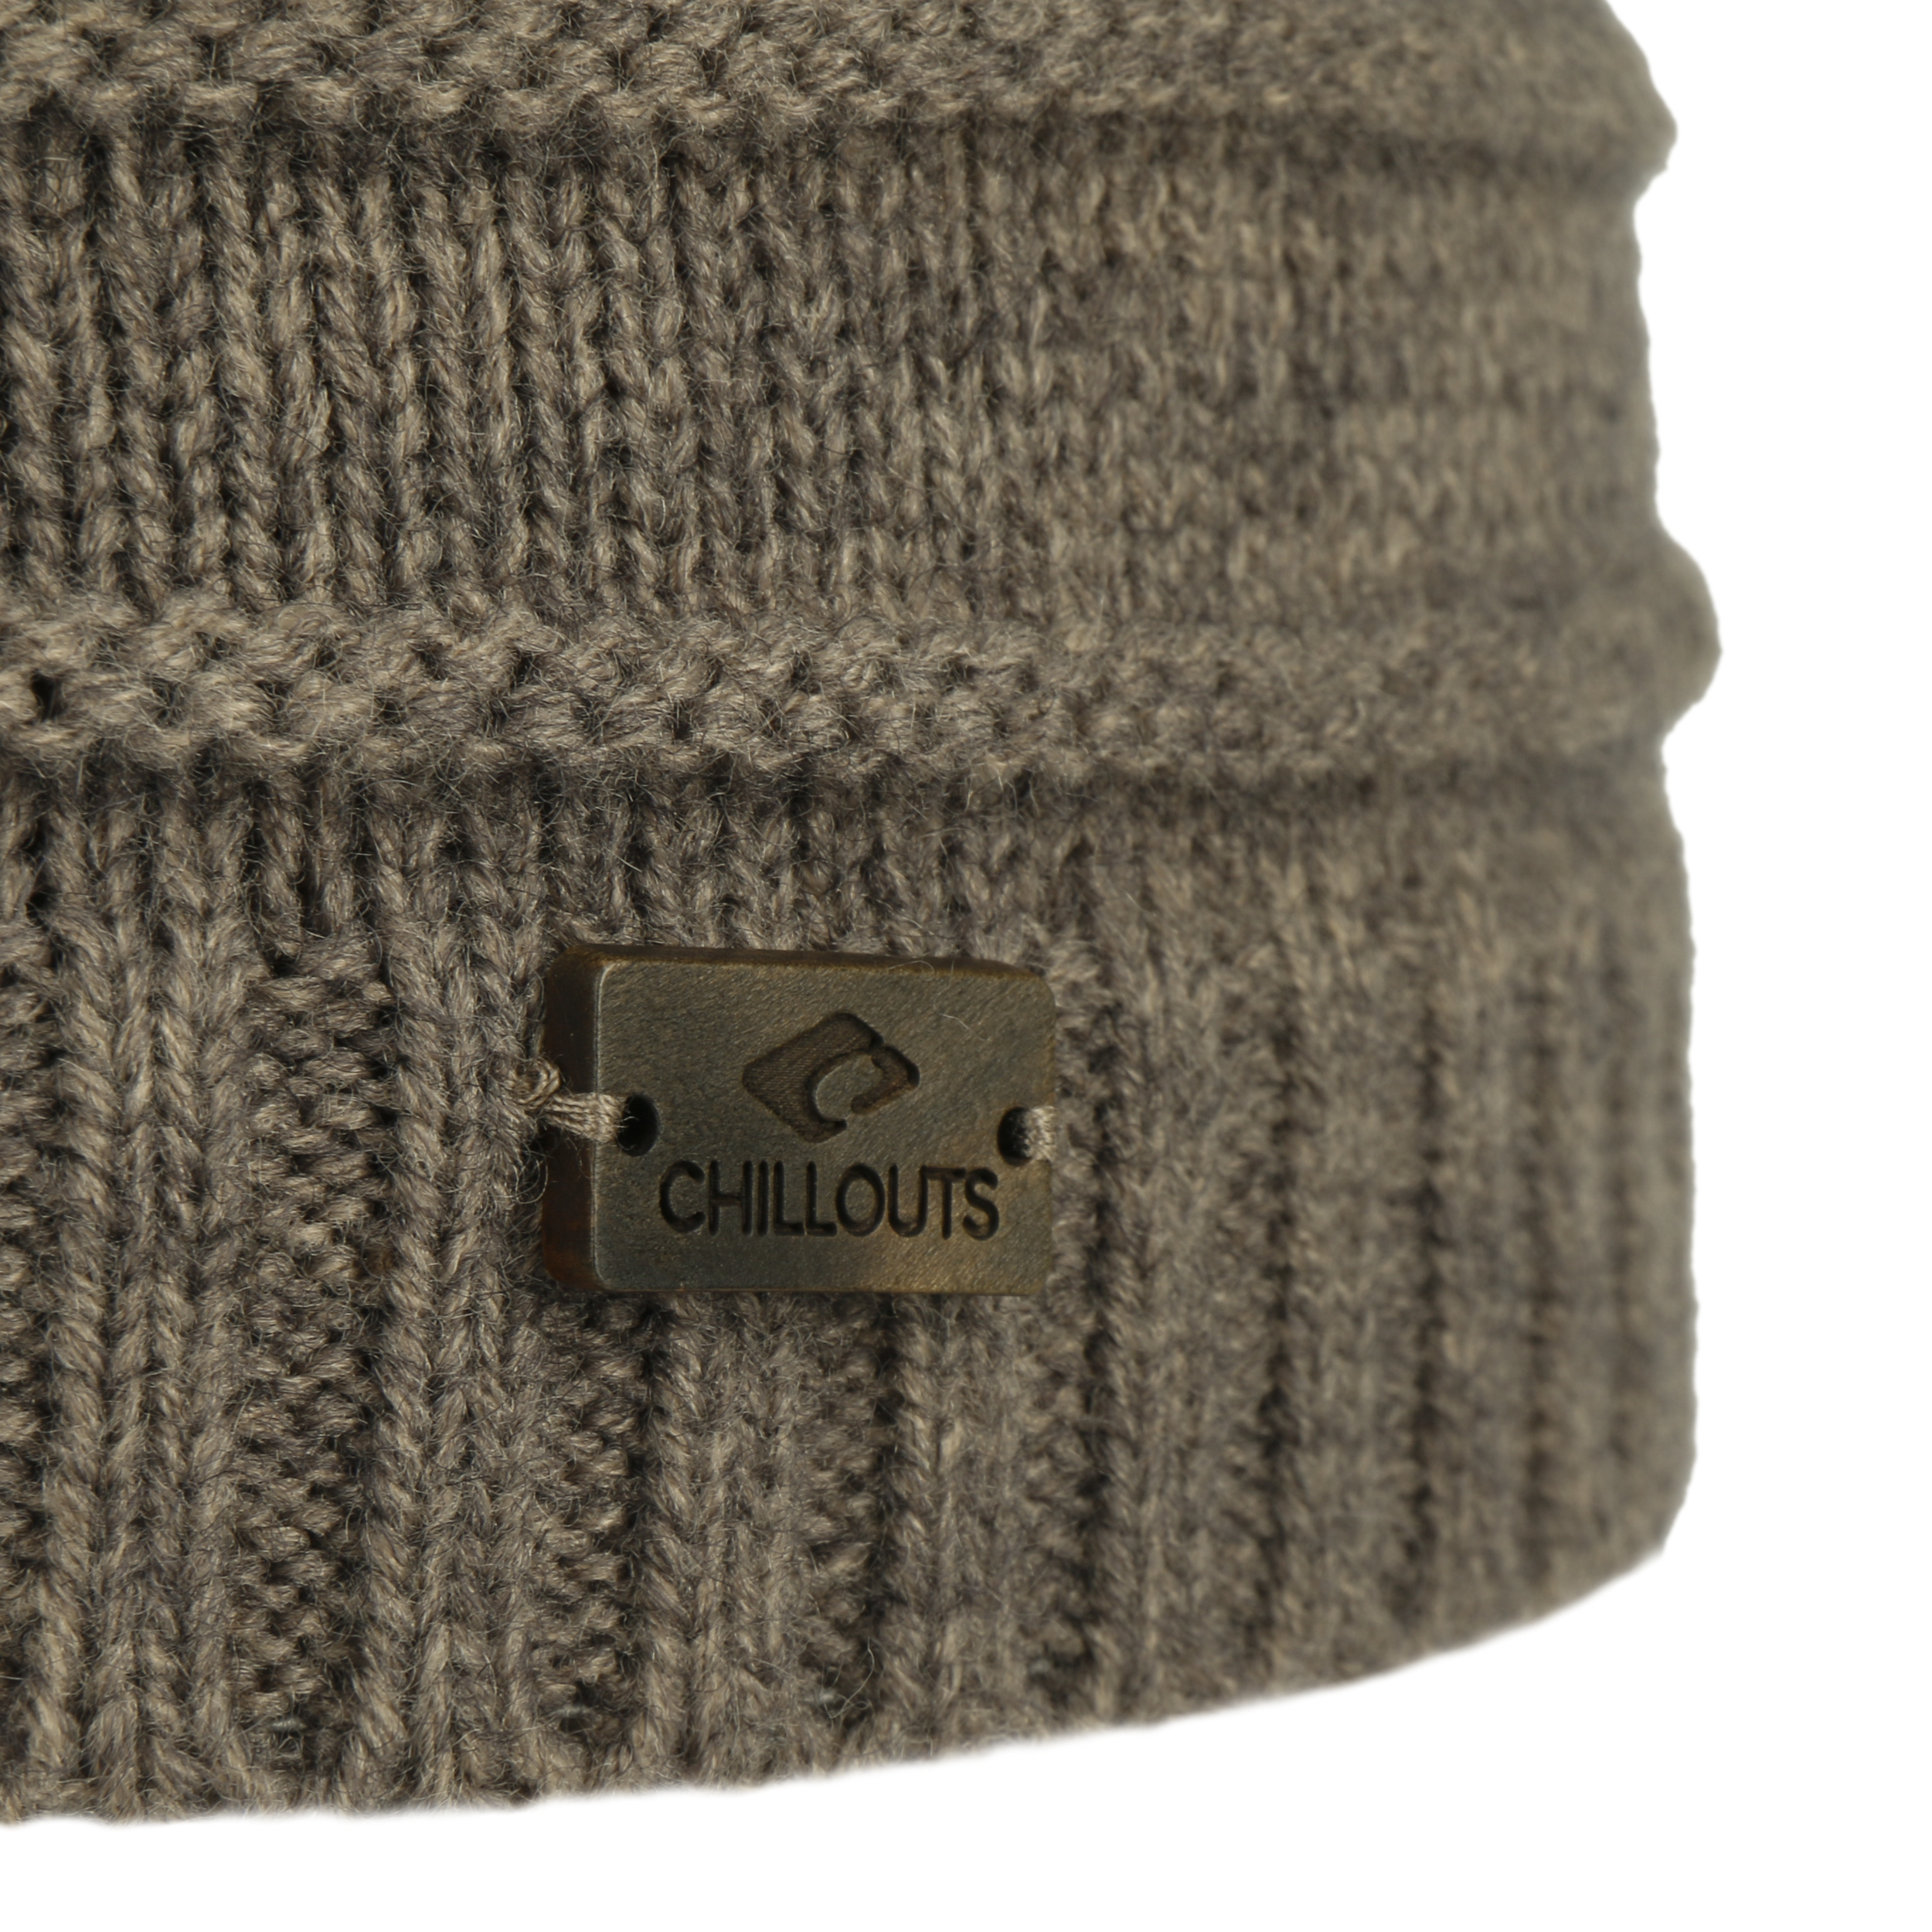 Arne Beanie Hat by Chillouts 26,95 - €